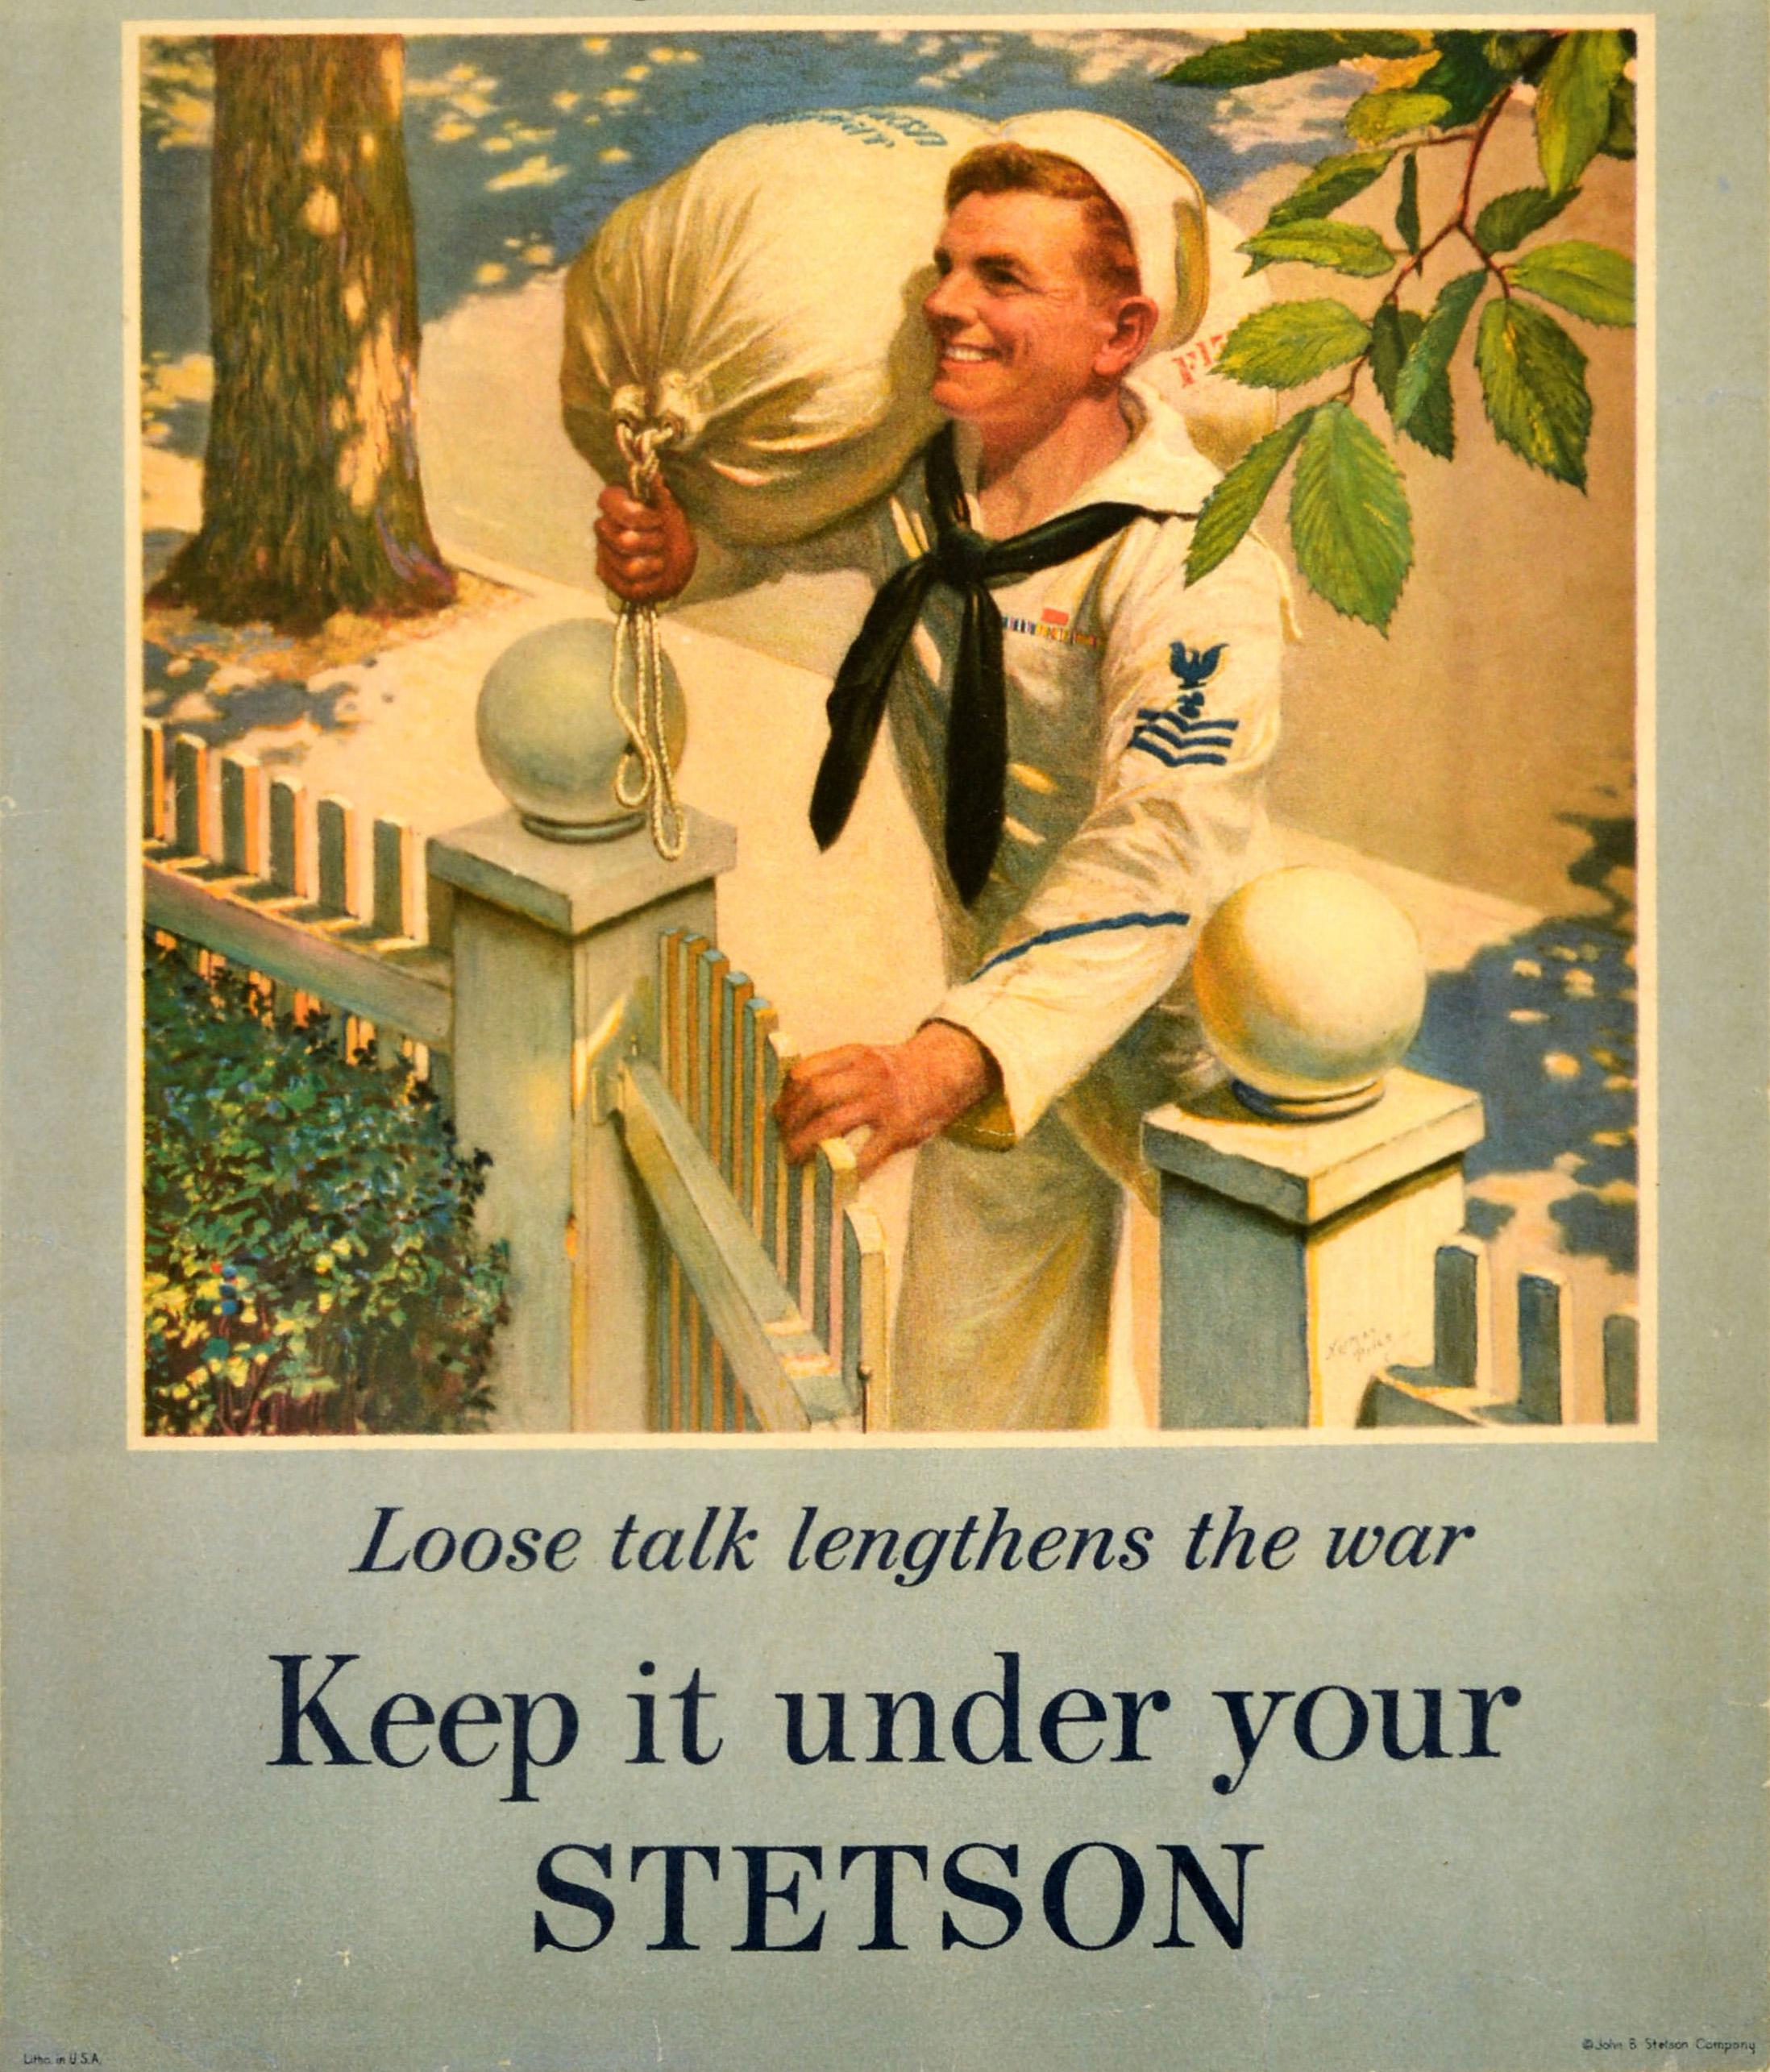 Original vintage advertising poster issued by the John B. Stetson Company during World War Two with a propaganda warning - Let's bring him home quicker Loose talk lengthens the war Keep it under your Stetson - featuring a smiling sailor carrying his